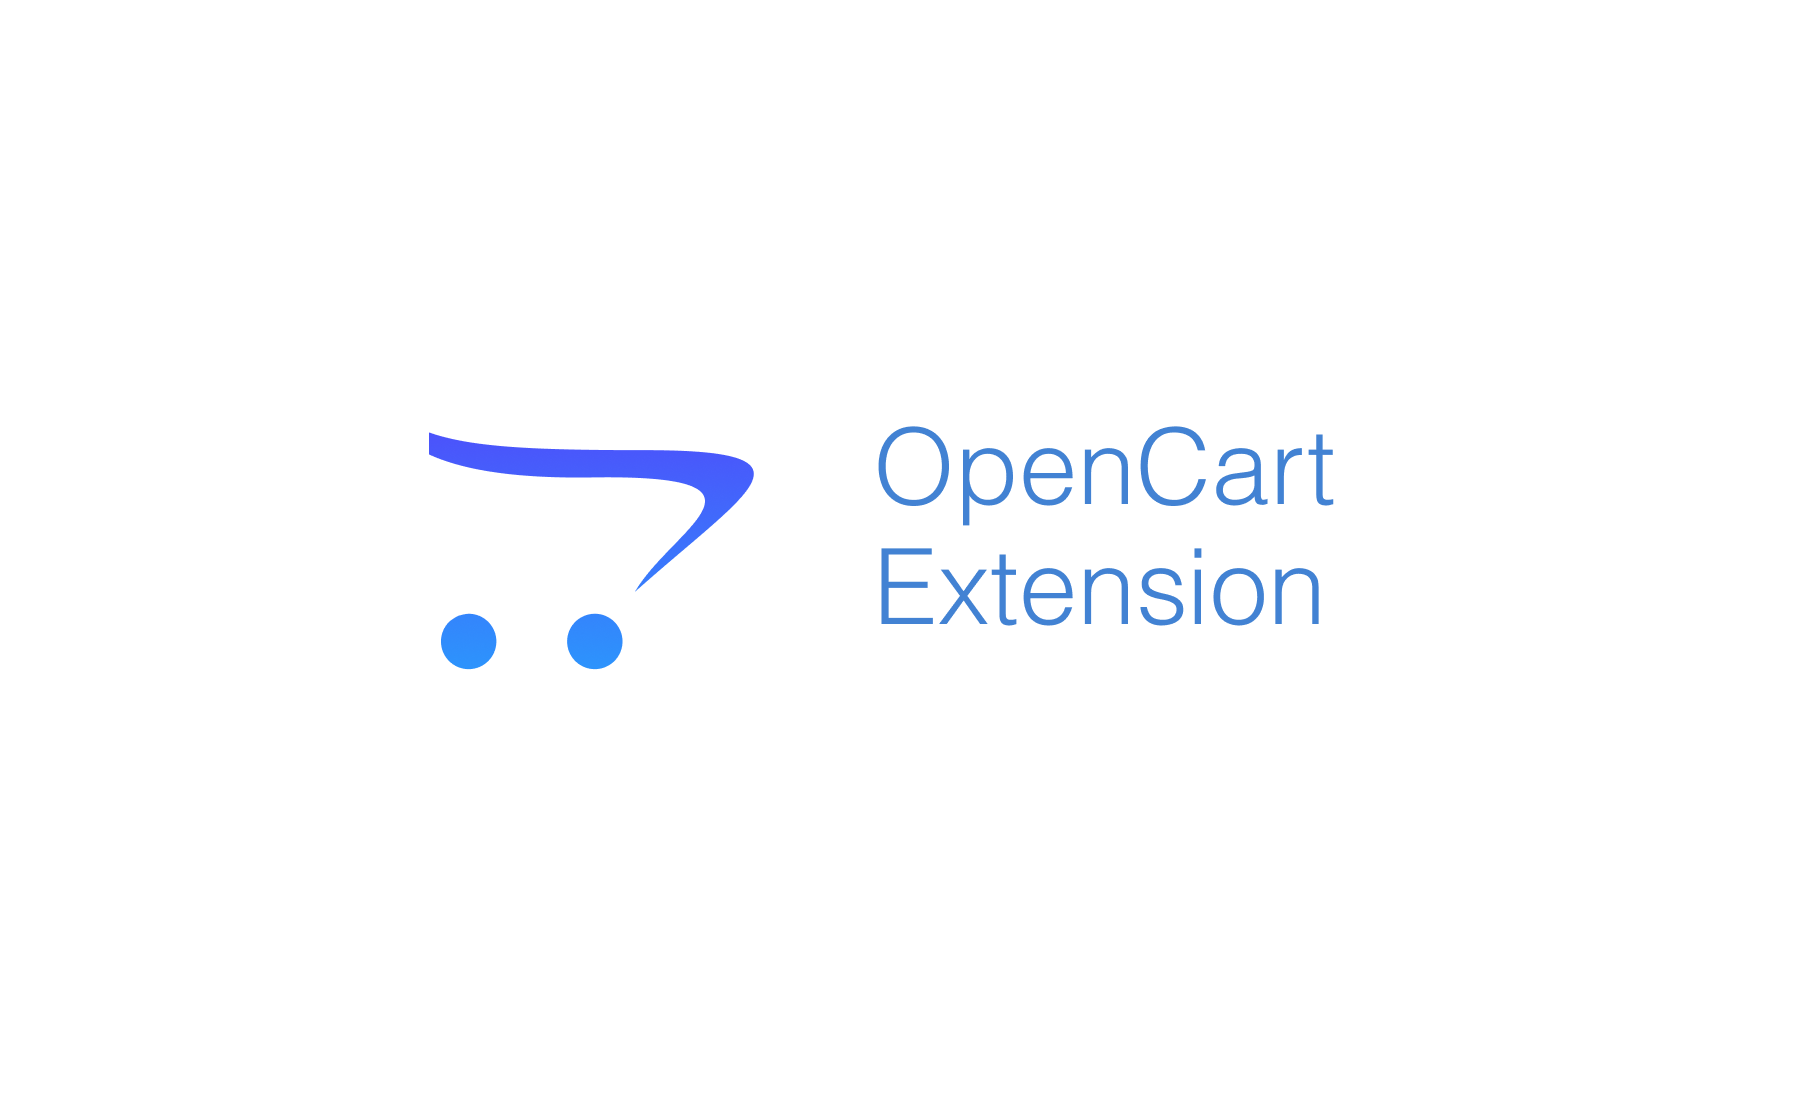 OpenCart Extension